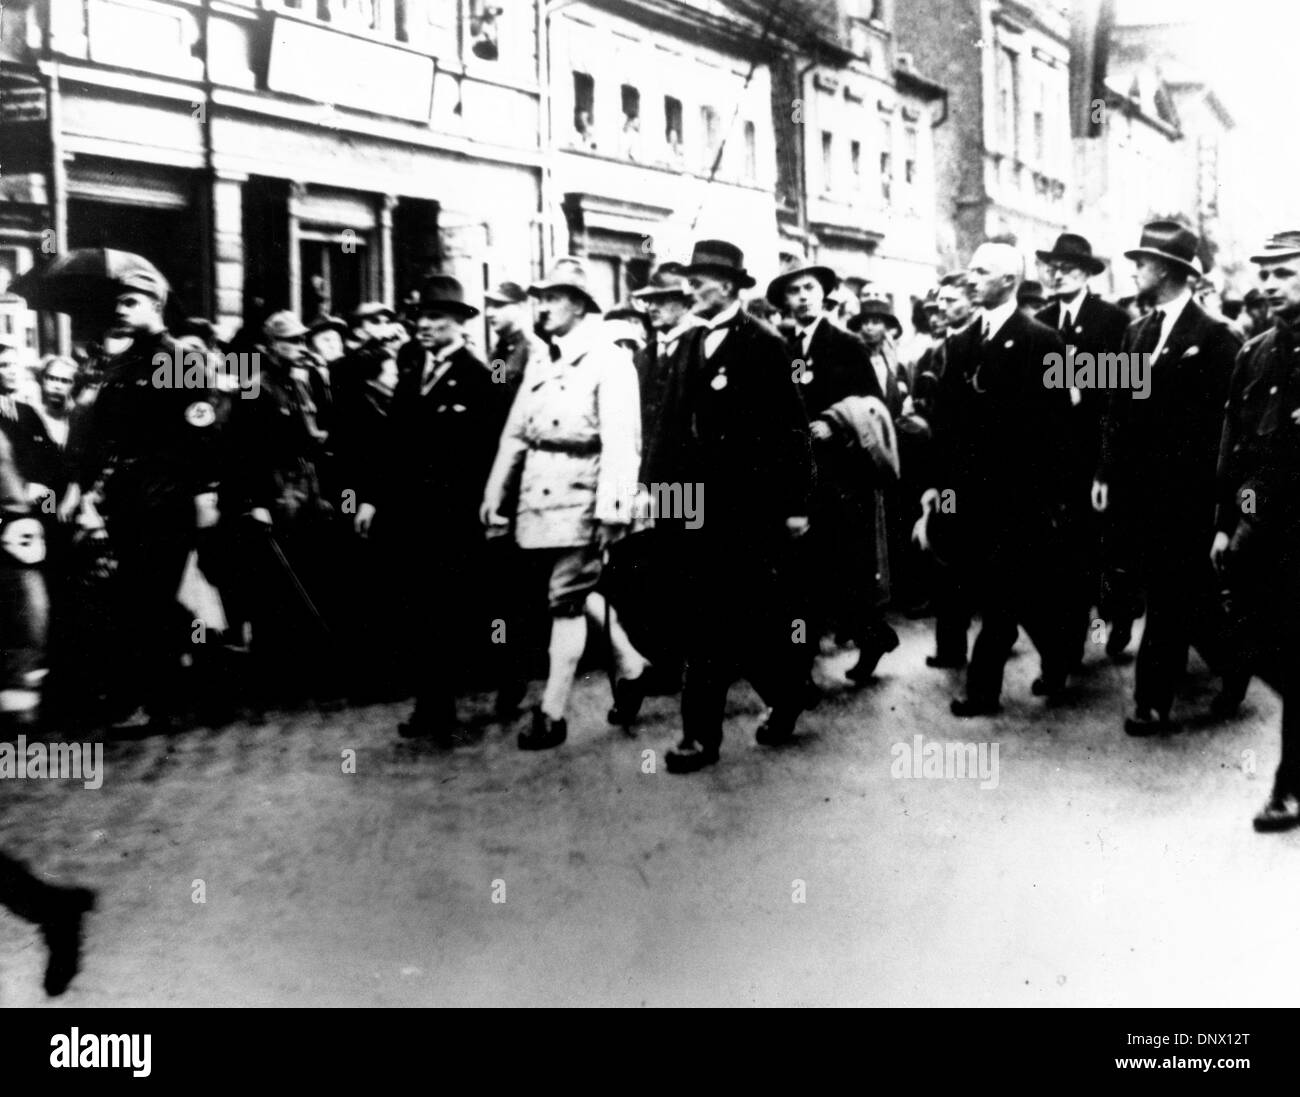 May 11, 1926 - Berlin, Germany - Nazi leader and Fuhrer of Germany, ADOLF HITLER with RUDOLF HESS and ERICH LUDENDORFF at a Nazi March in 1926. (Credit Image: © KEYSTONE Pictures/ZUMAPRESS.com) Stock Photo